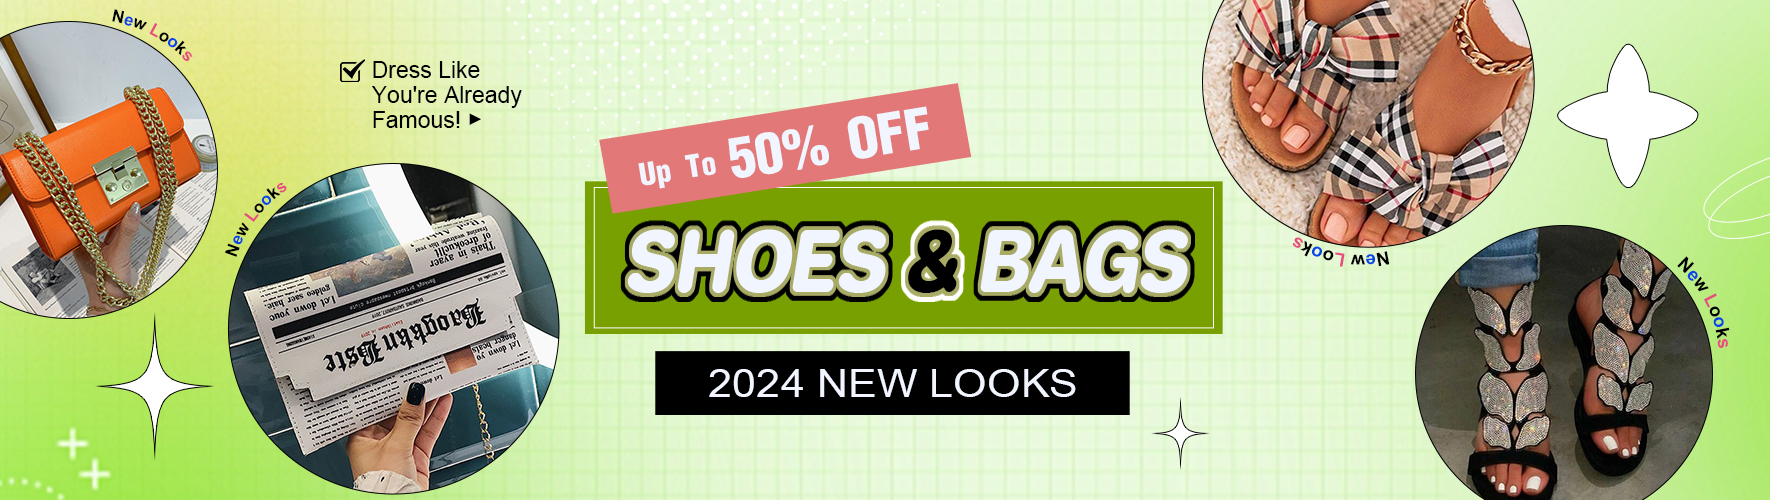 Wholesale Women's Shoes & Bags  Dress Like You're Already Famous!  Up To 50% OFF